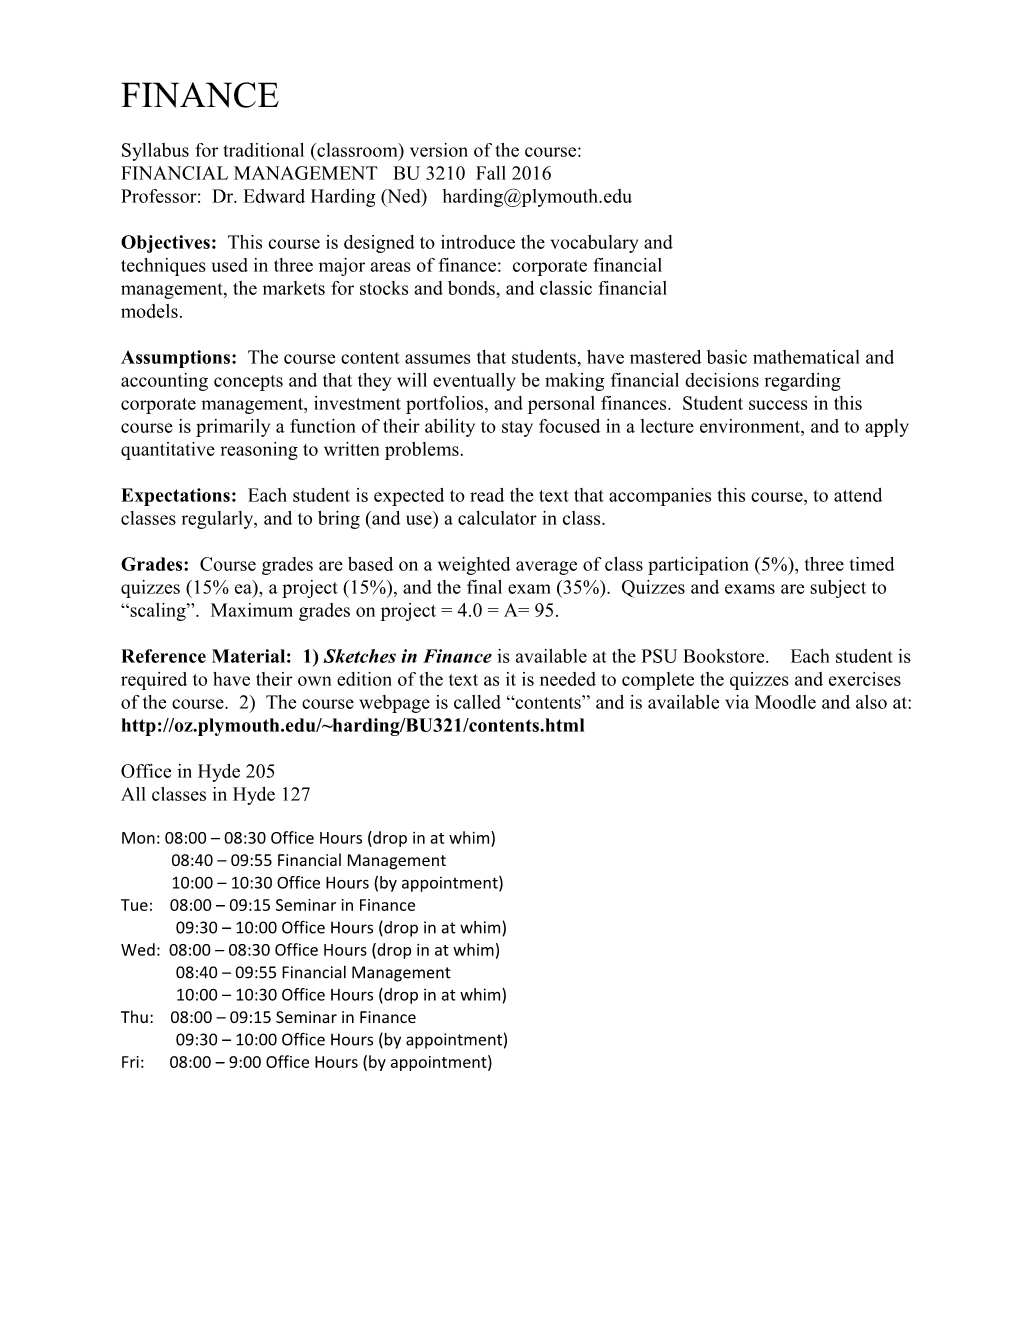 Syllabus for Traditional (Classroom) Version of the Course